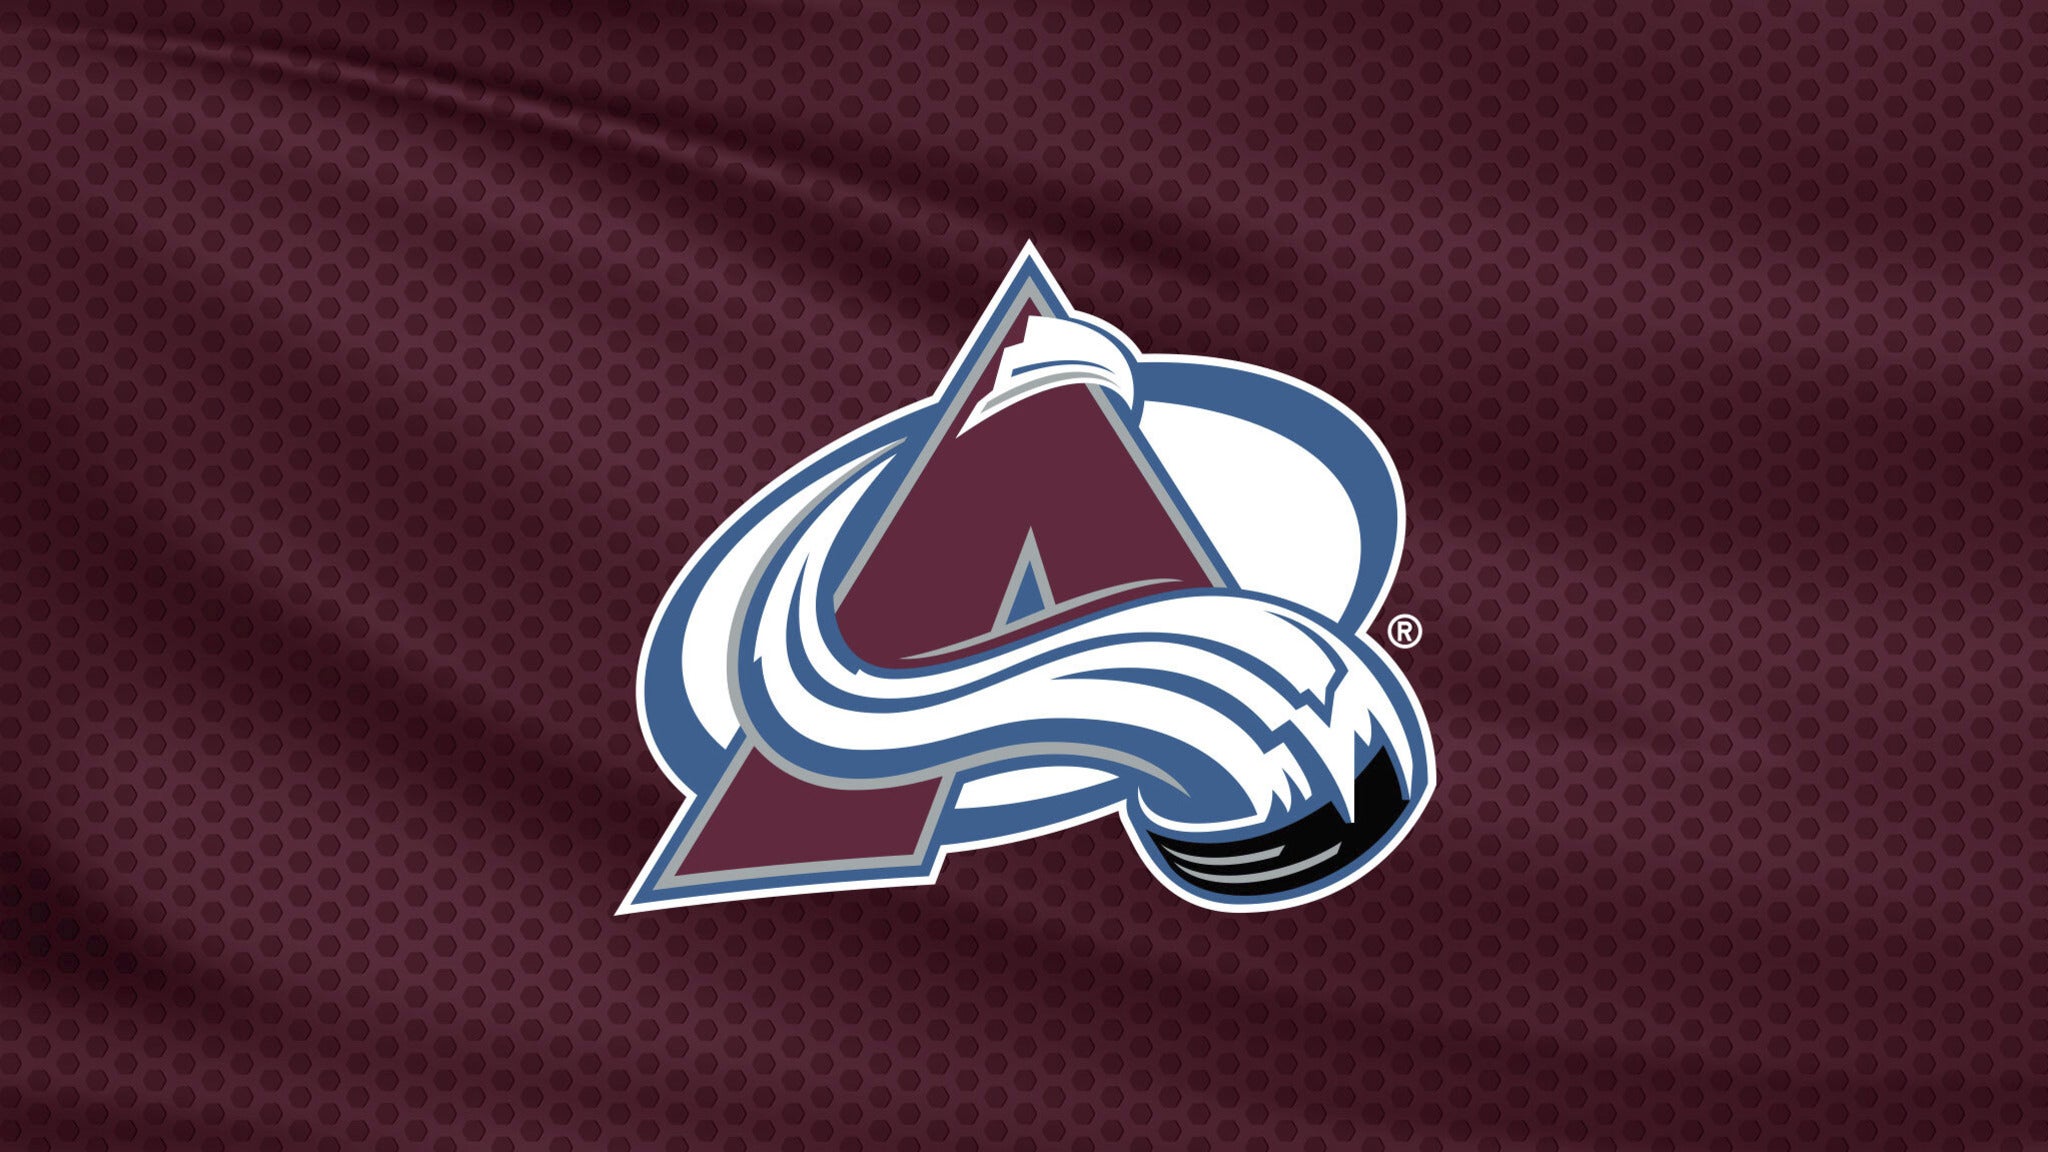 Colorado Avalanche vs. Detroit Red Wings at Ball Arena - Denver, CO 80204